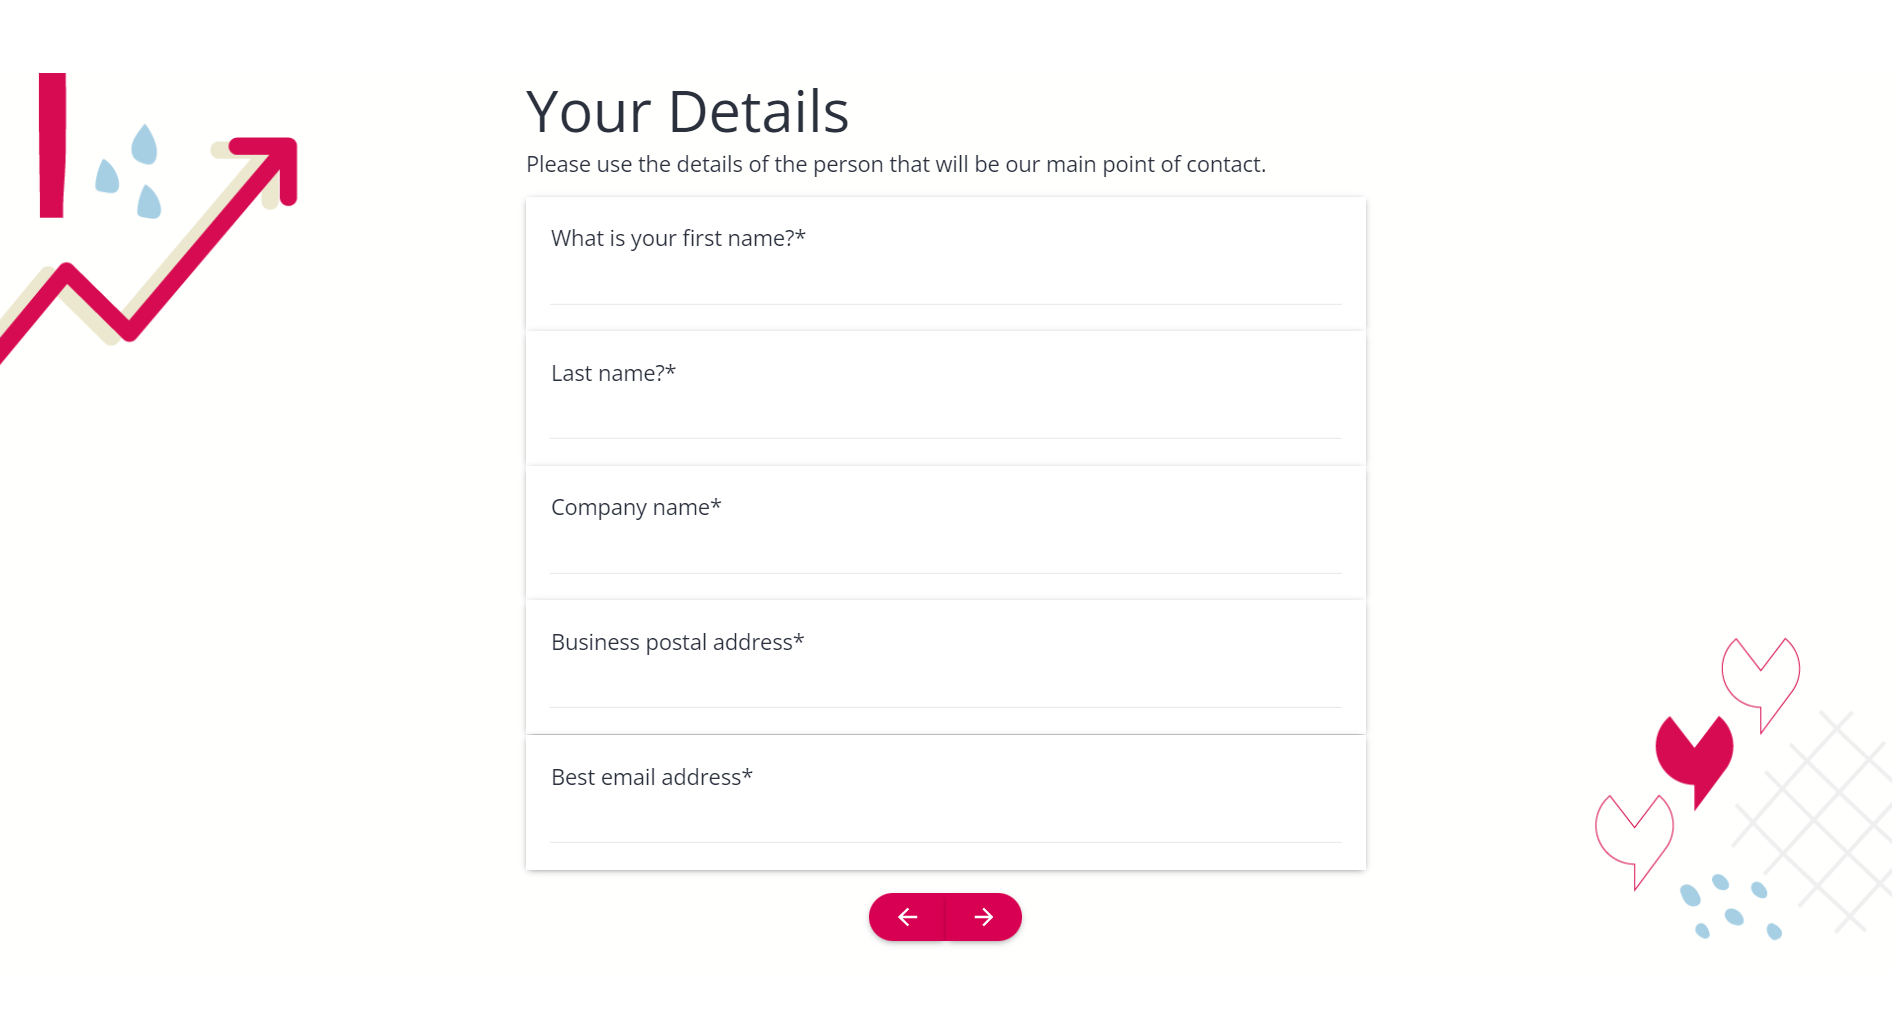 Yatter onboarding form - Your Details section